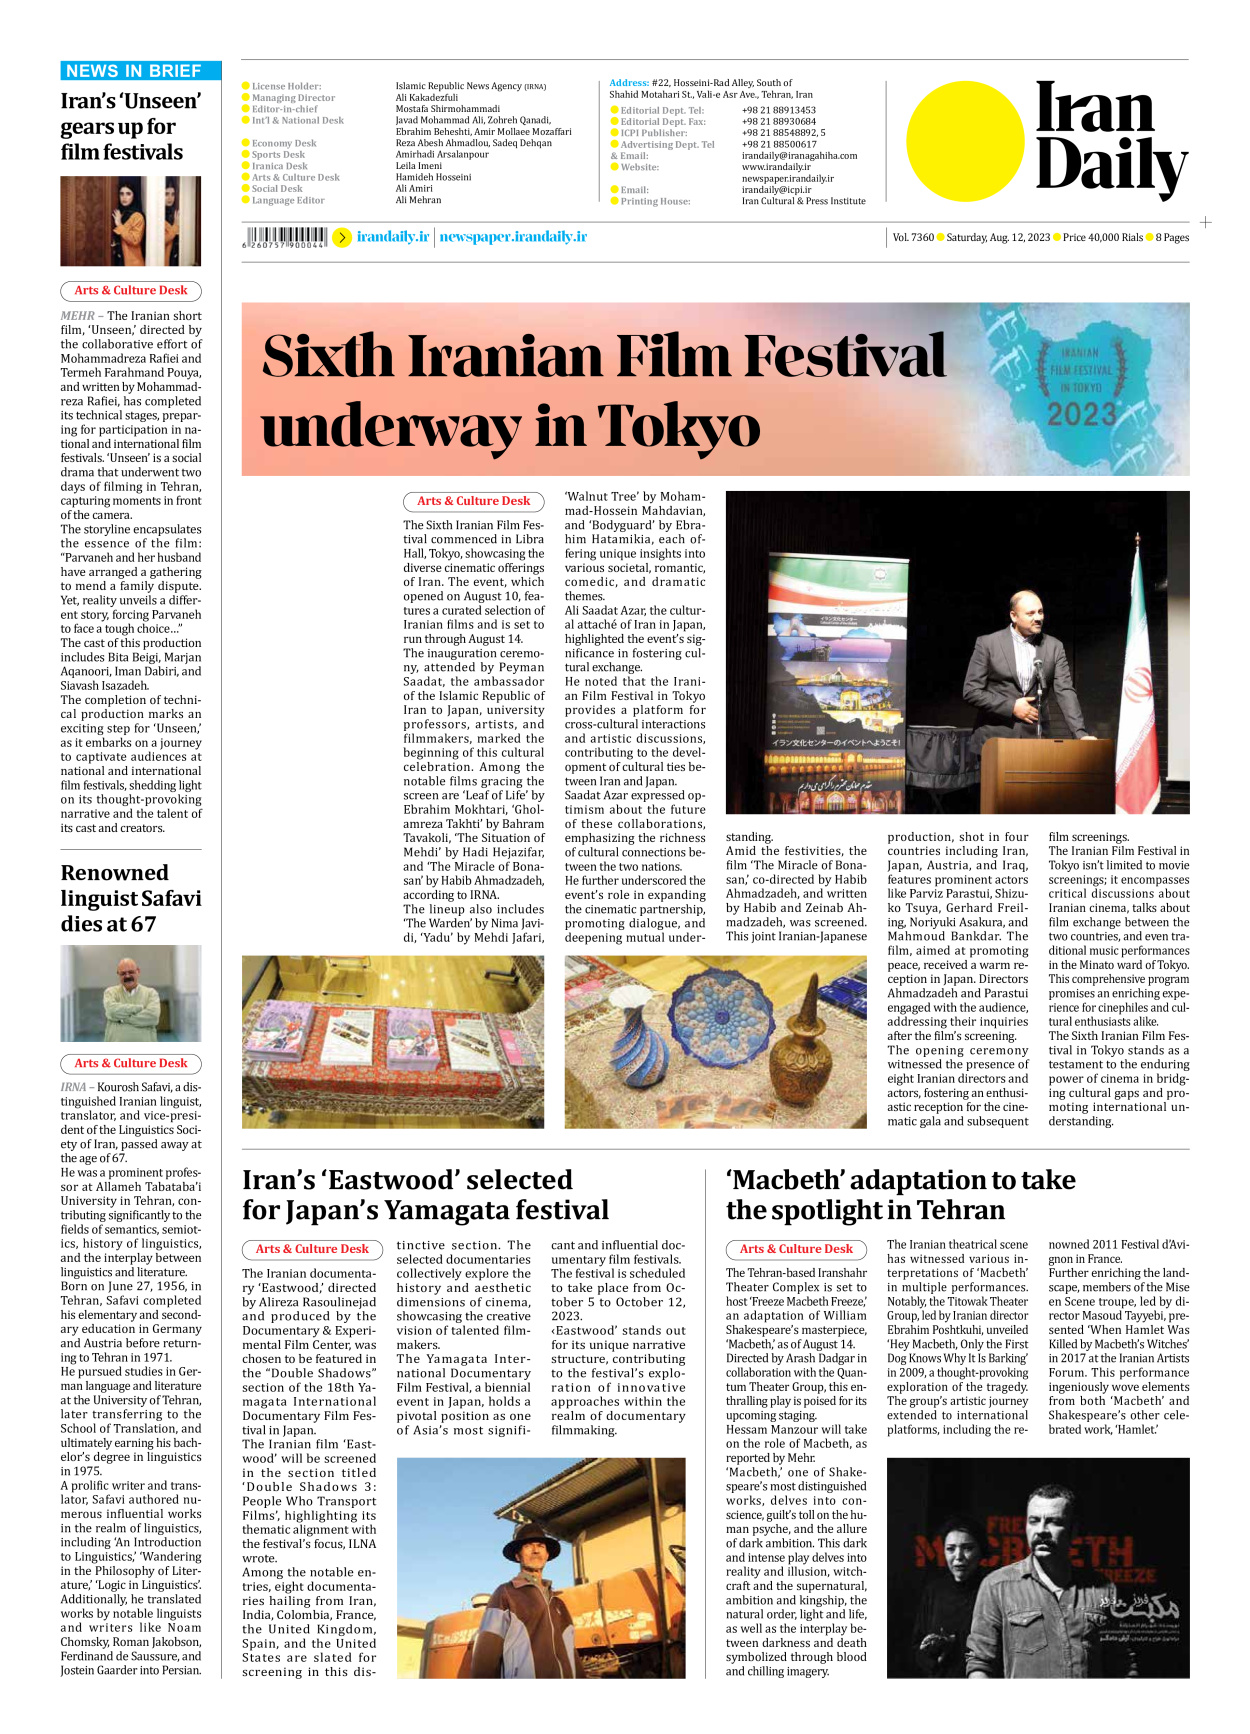 Iran Daily - Number Seven Thousand Three Hundred and Sixty - 12 August 2023 - Page 8